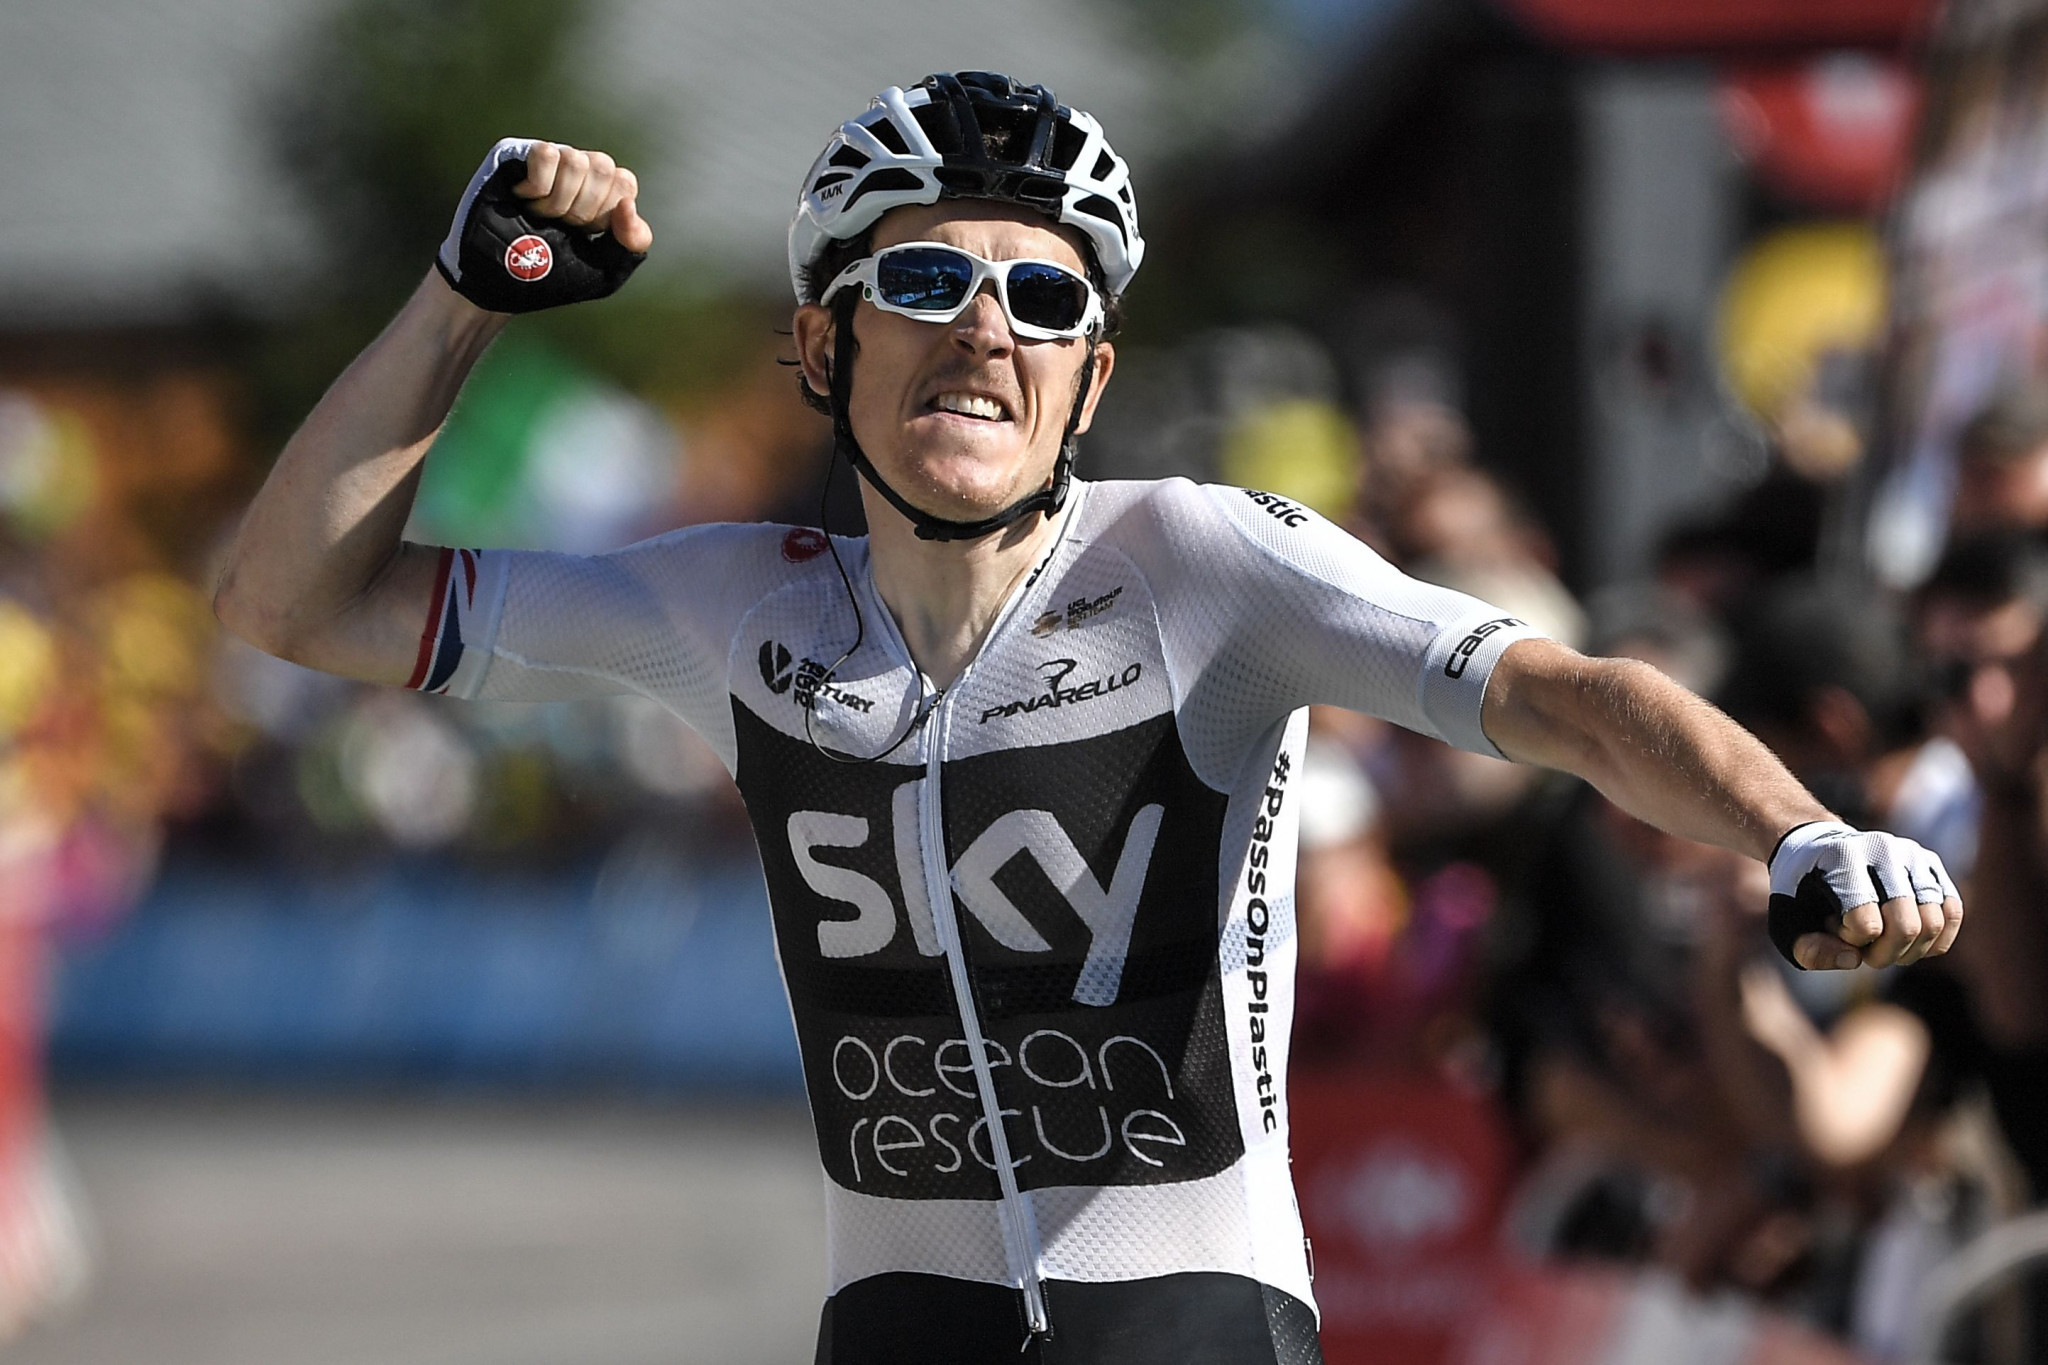 Geraint Thomas moved into the race lead by winning stage 11 ©Getty Images